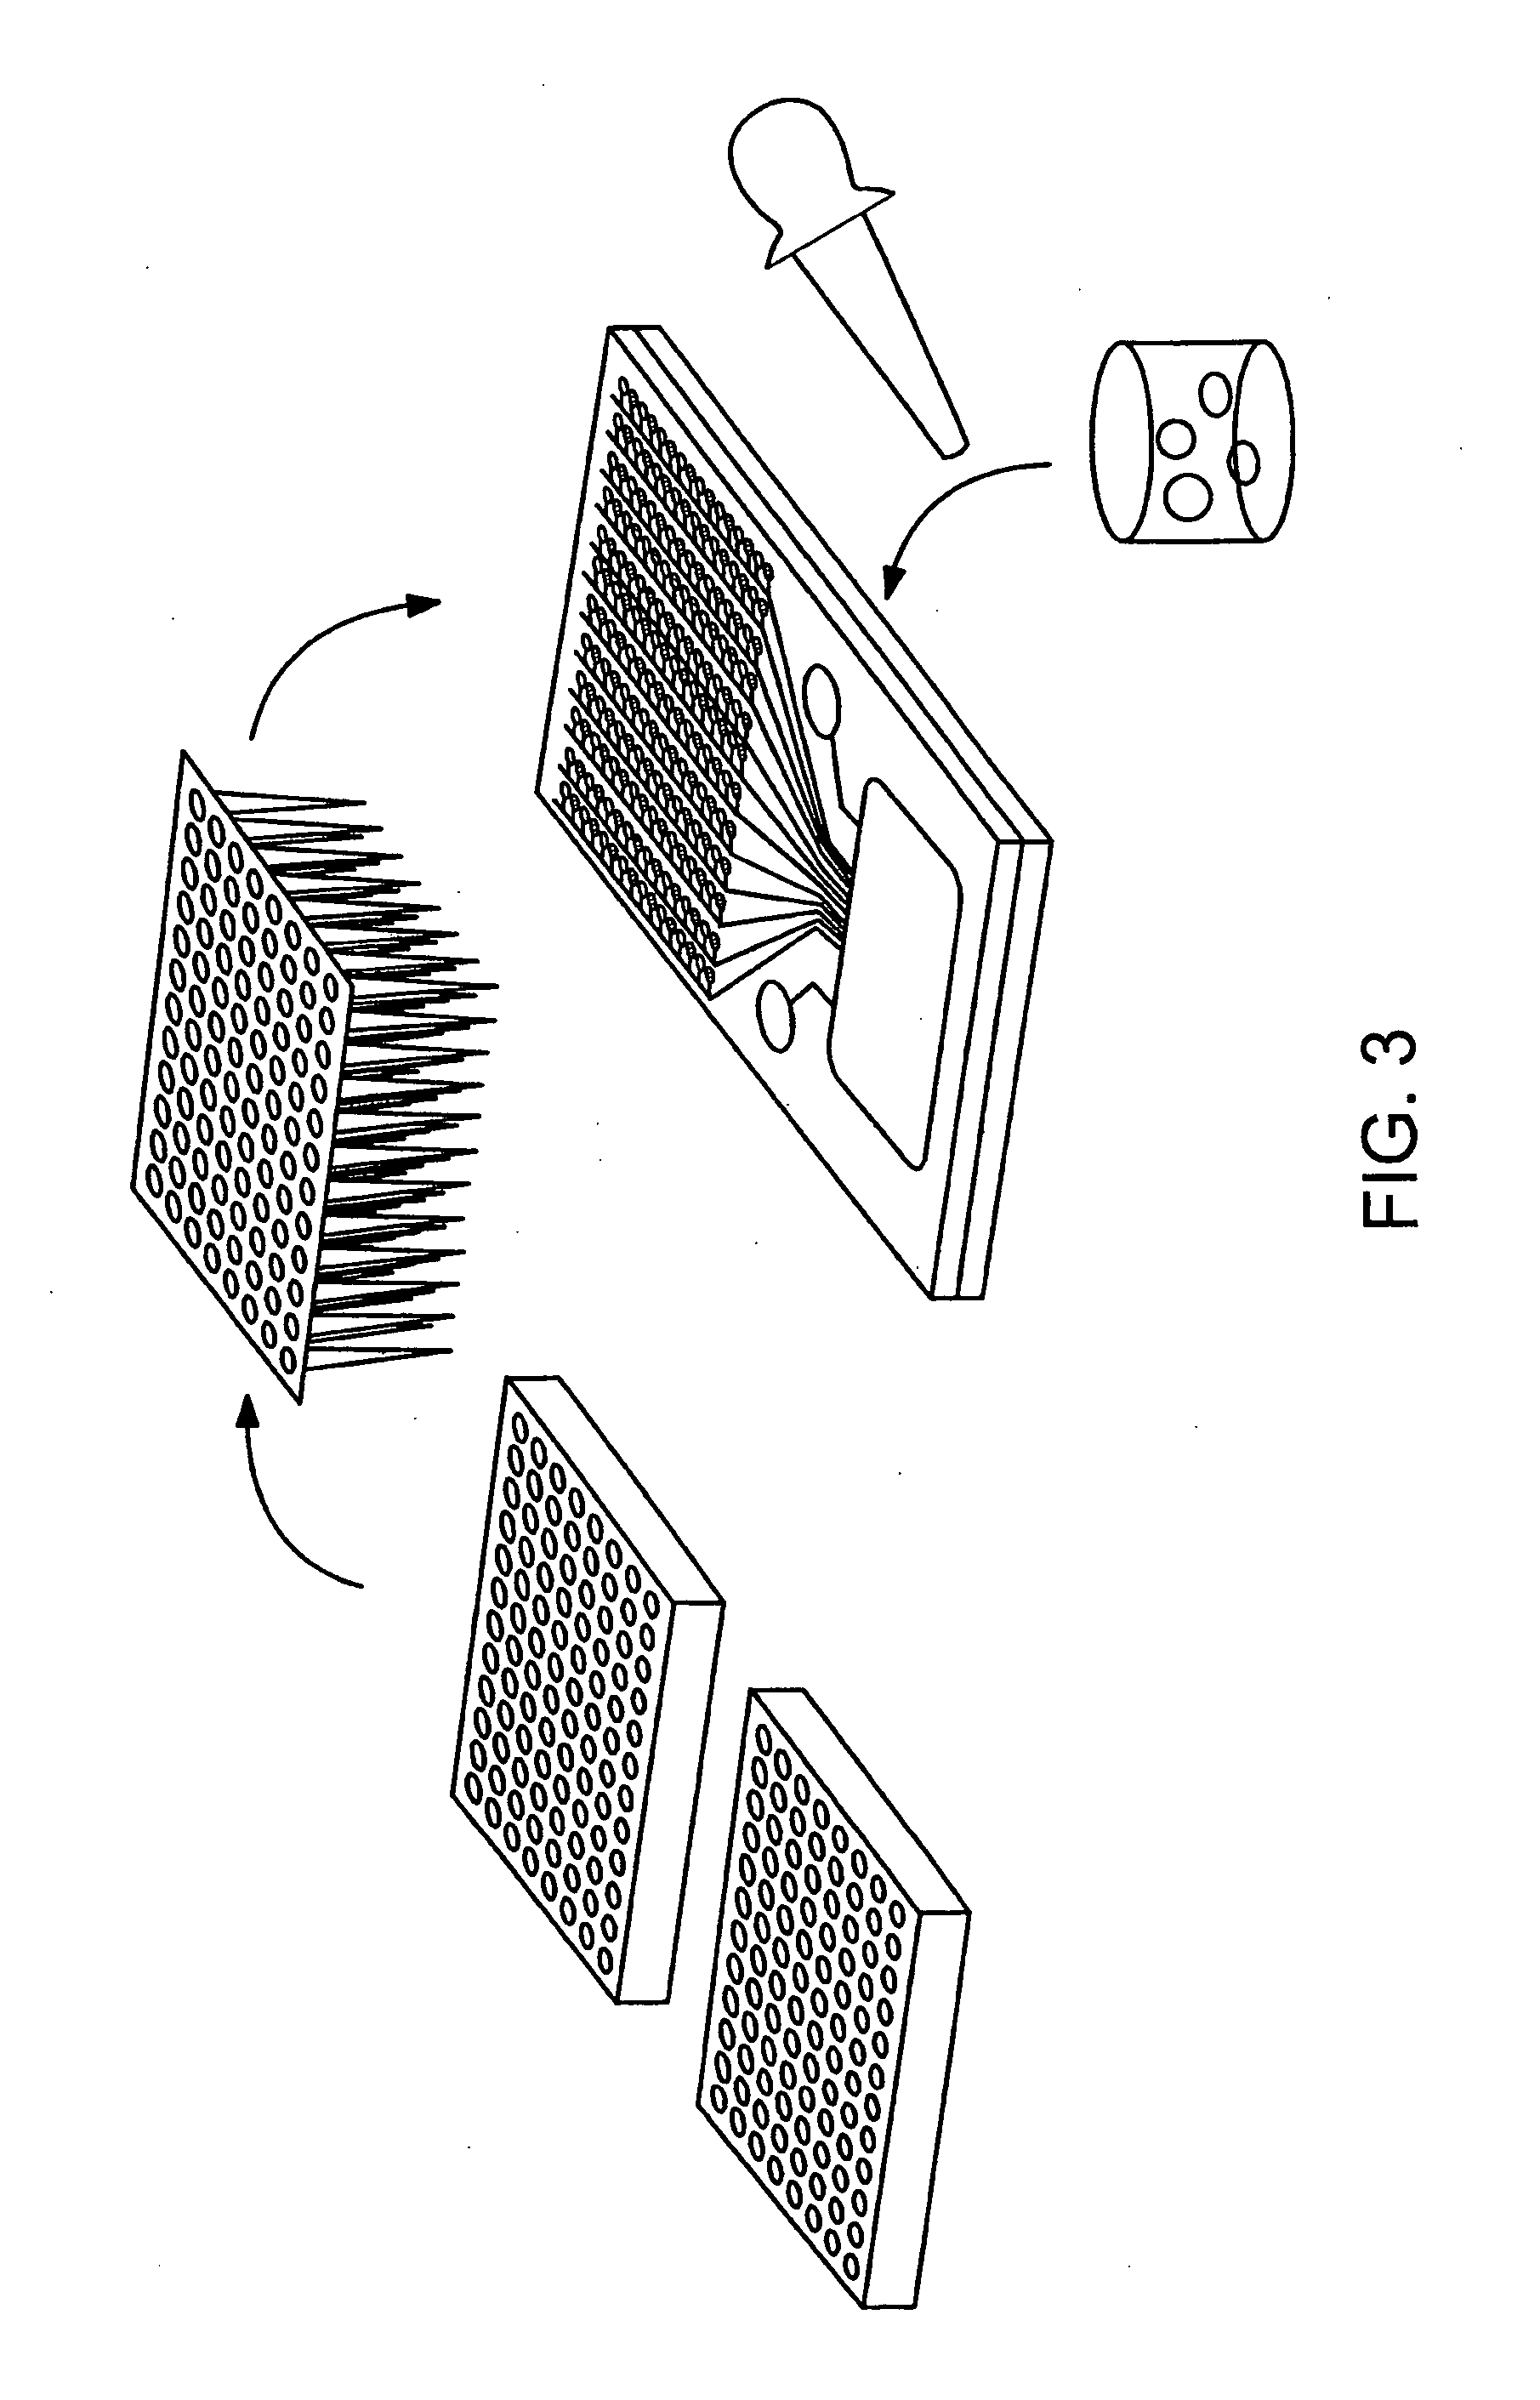 Systems and methods for rapidly changing the solution environment around sensors